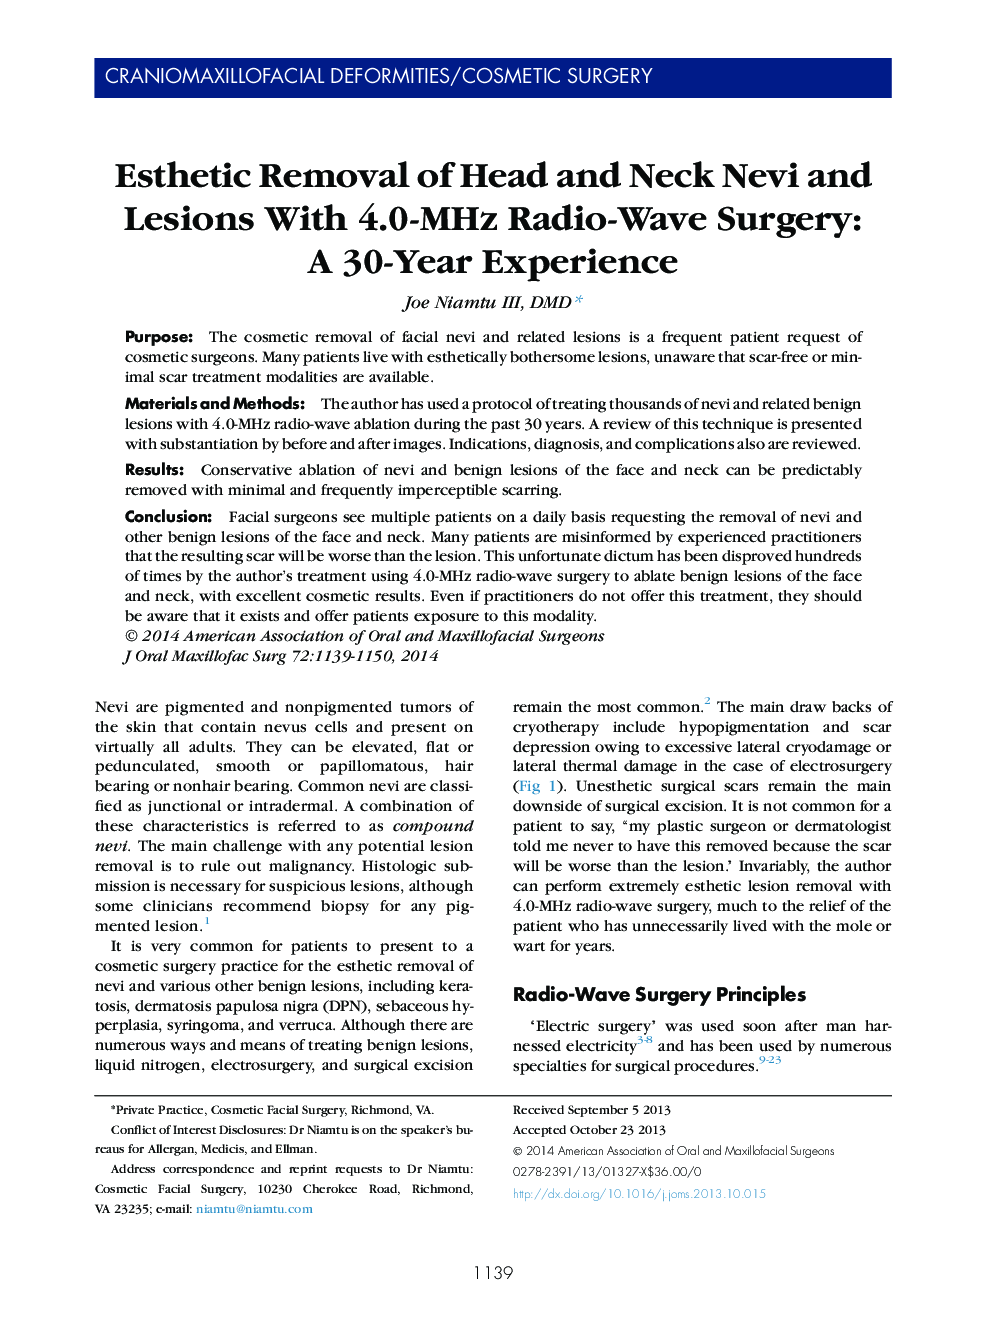 Esthetic Removal of Head and Neck Nevi and Lesions With 4.0-MHz Radio-Wave Surgery: A 30-Year Experience 